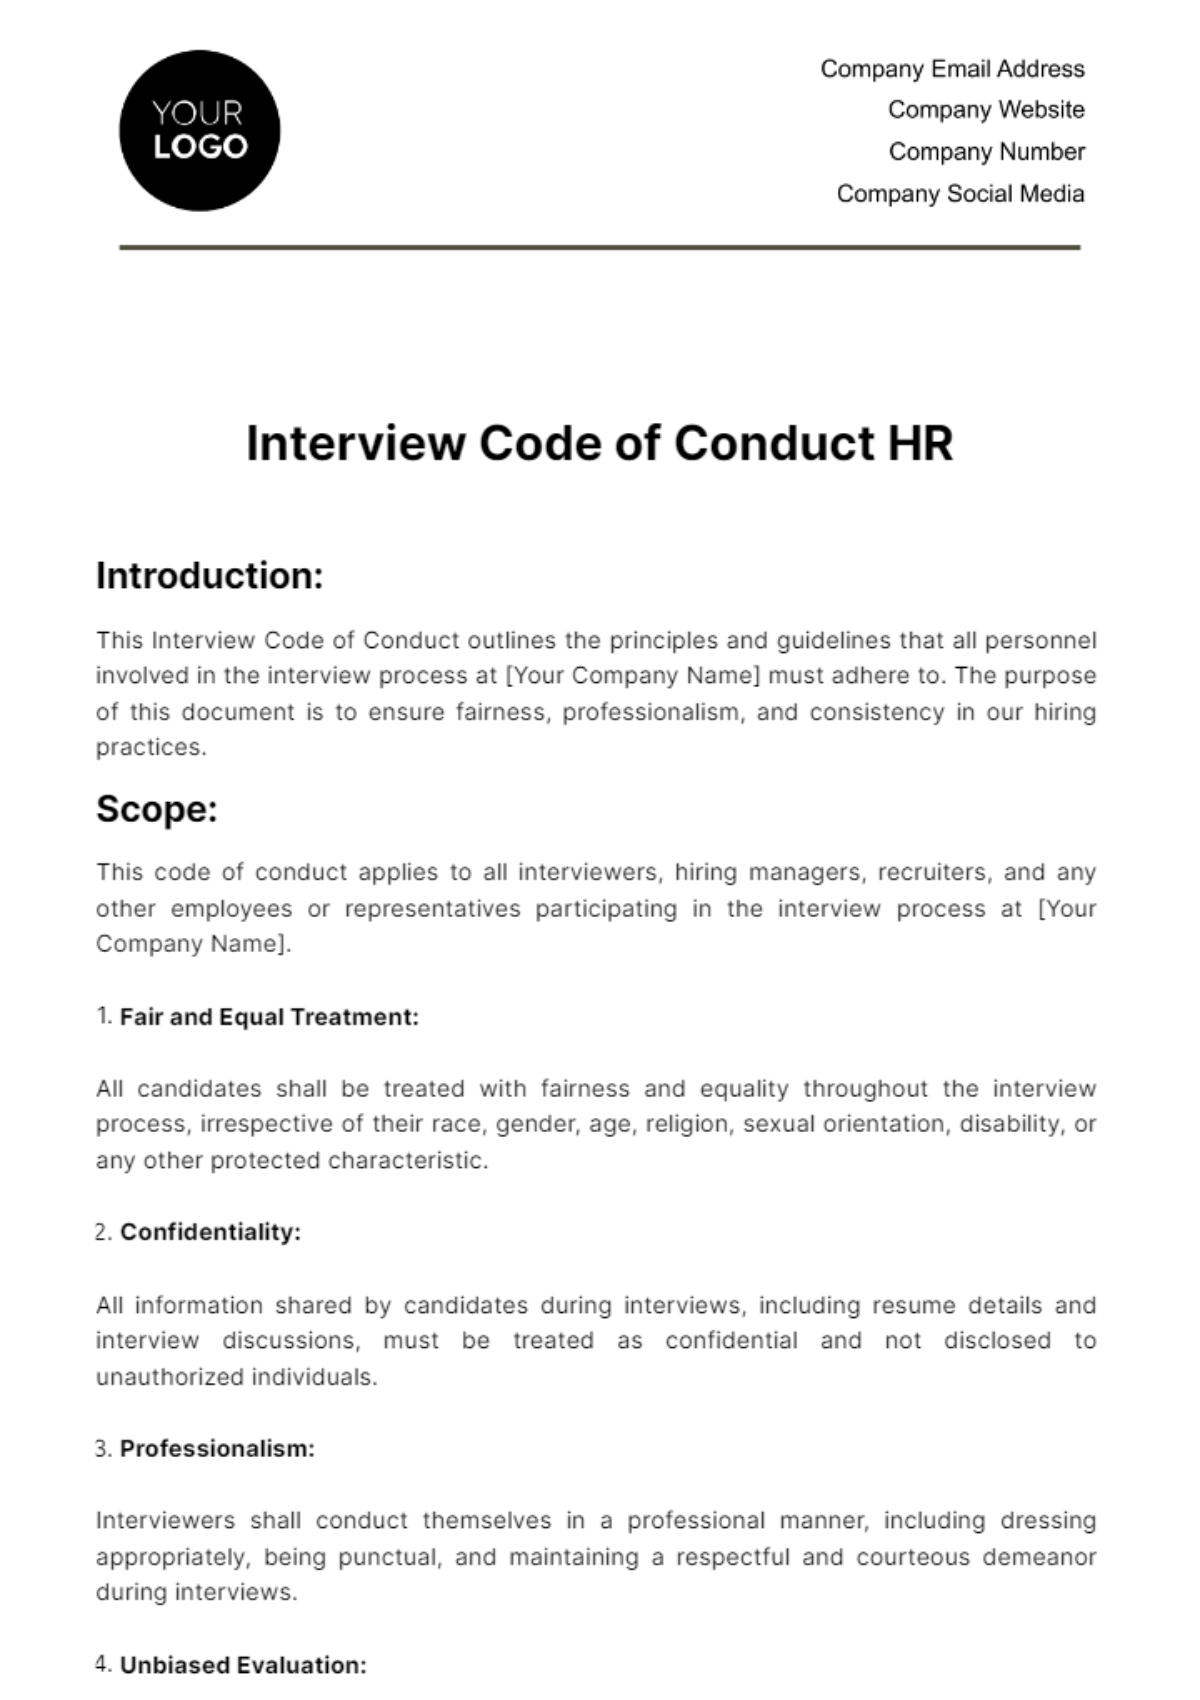 Interview Code Of Conduct HR Template